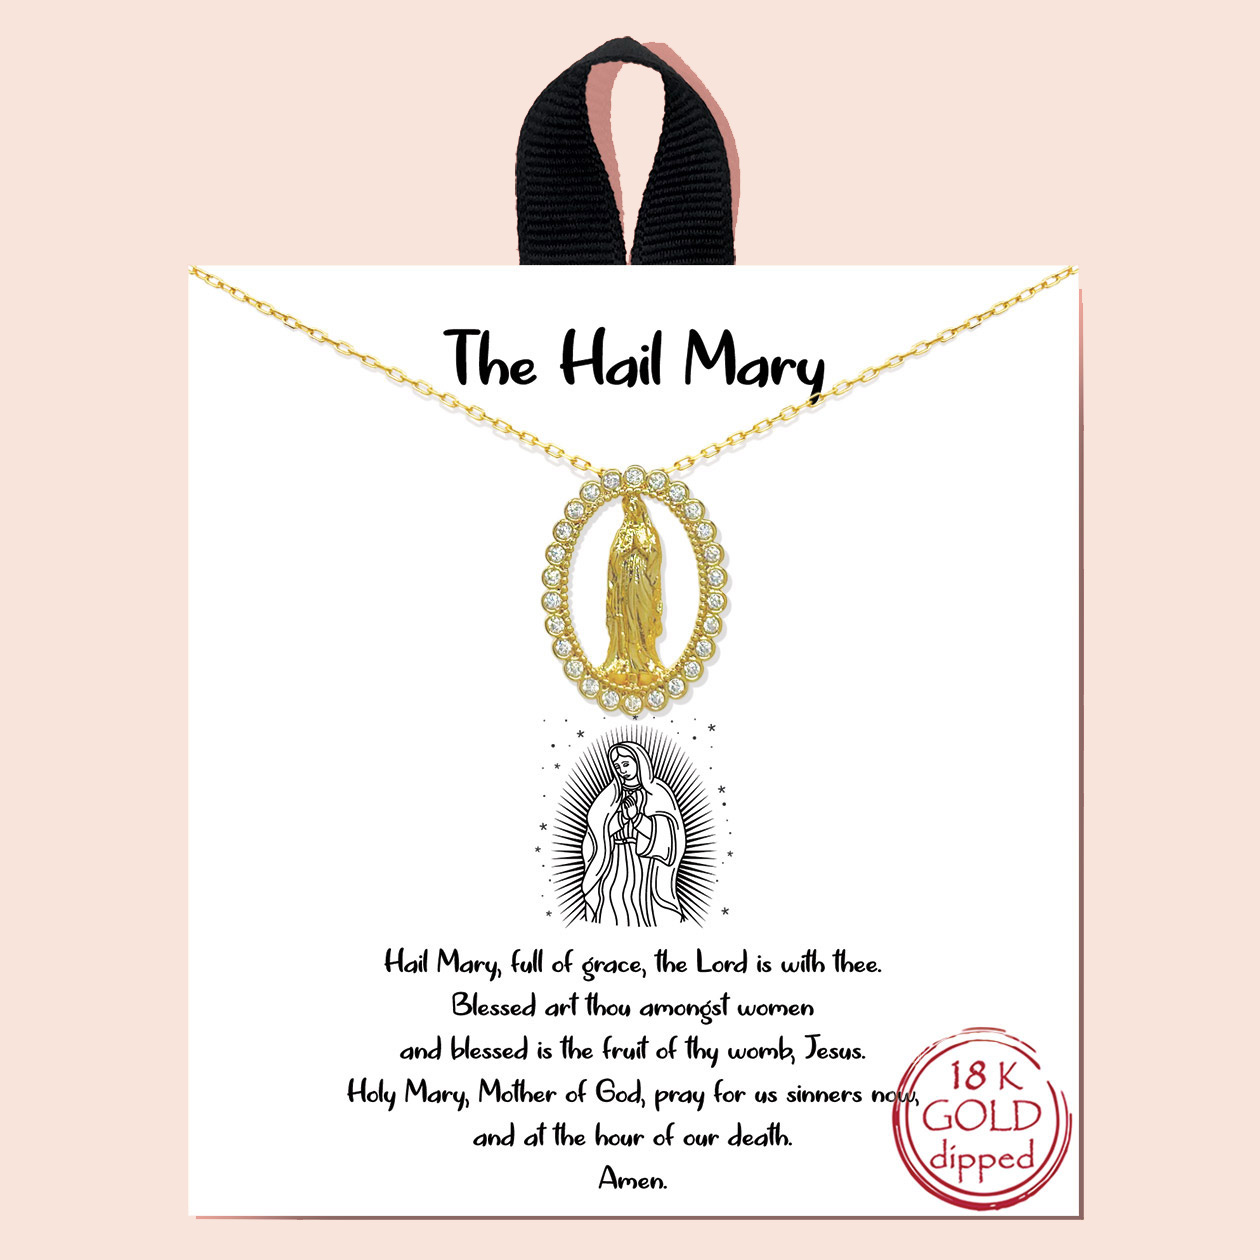 86016_Gold, "the hail mary" virgin mary necklace/18k gold dipped